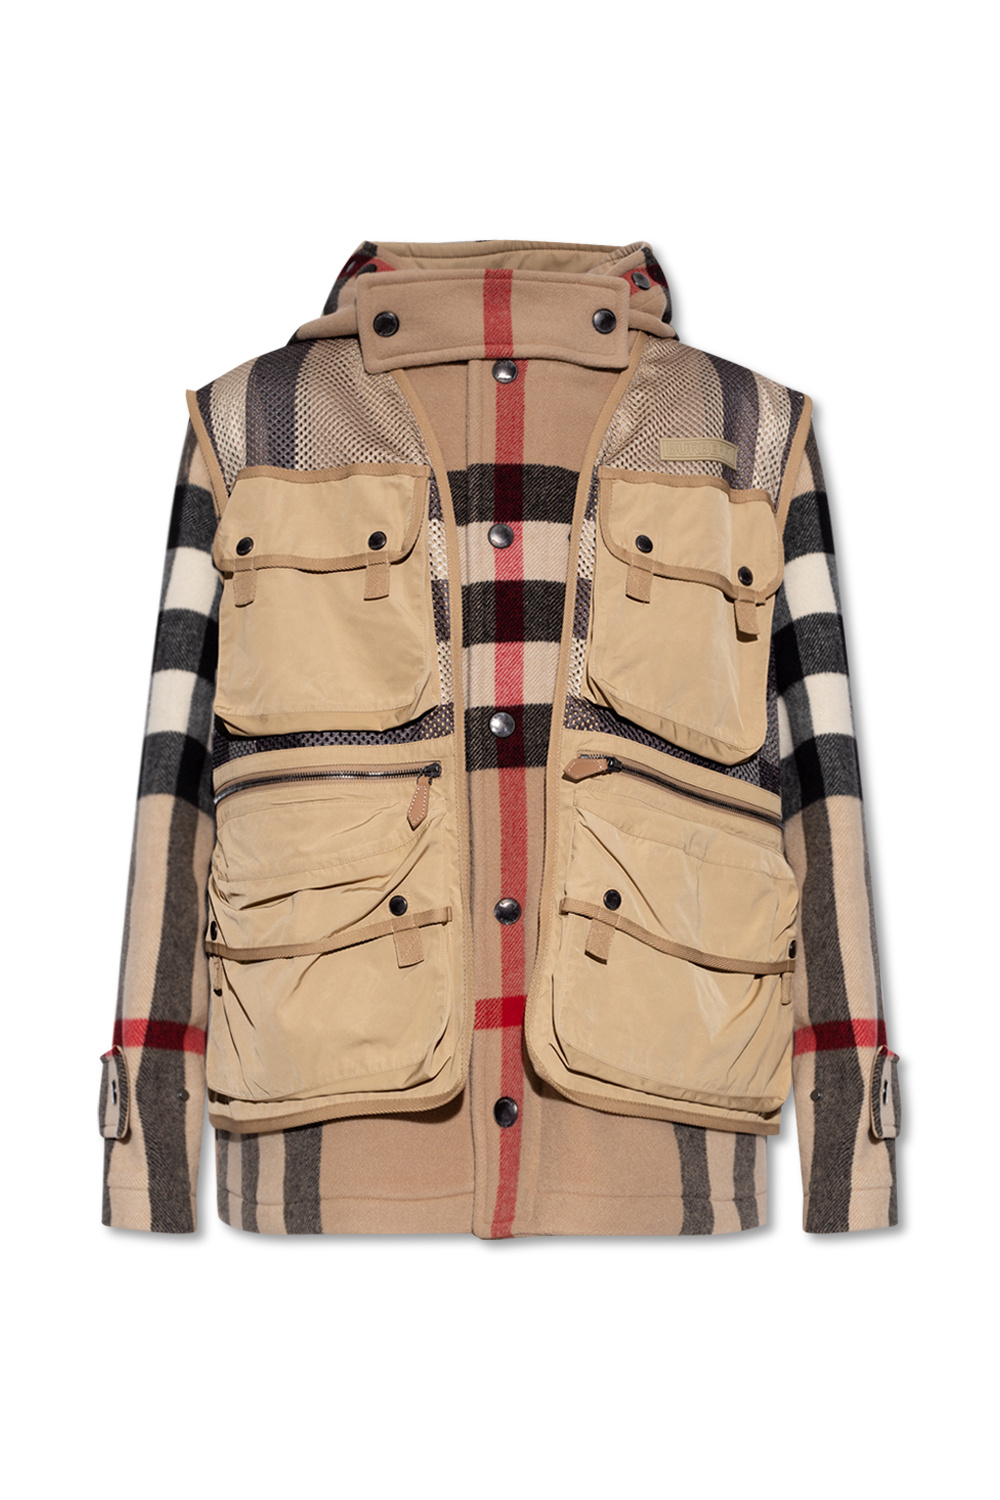 Pre-owned Burberry Monogram Stripe Detail Puffer Jacket Size Small